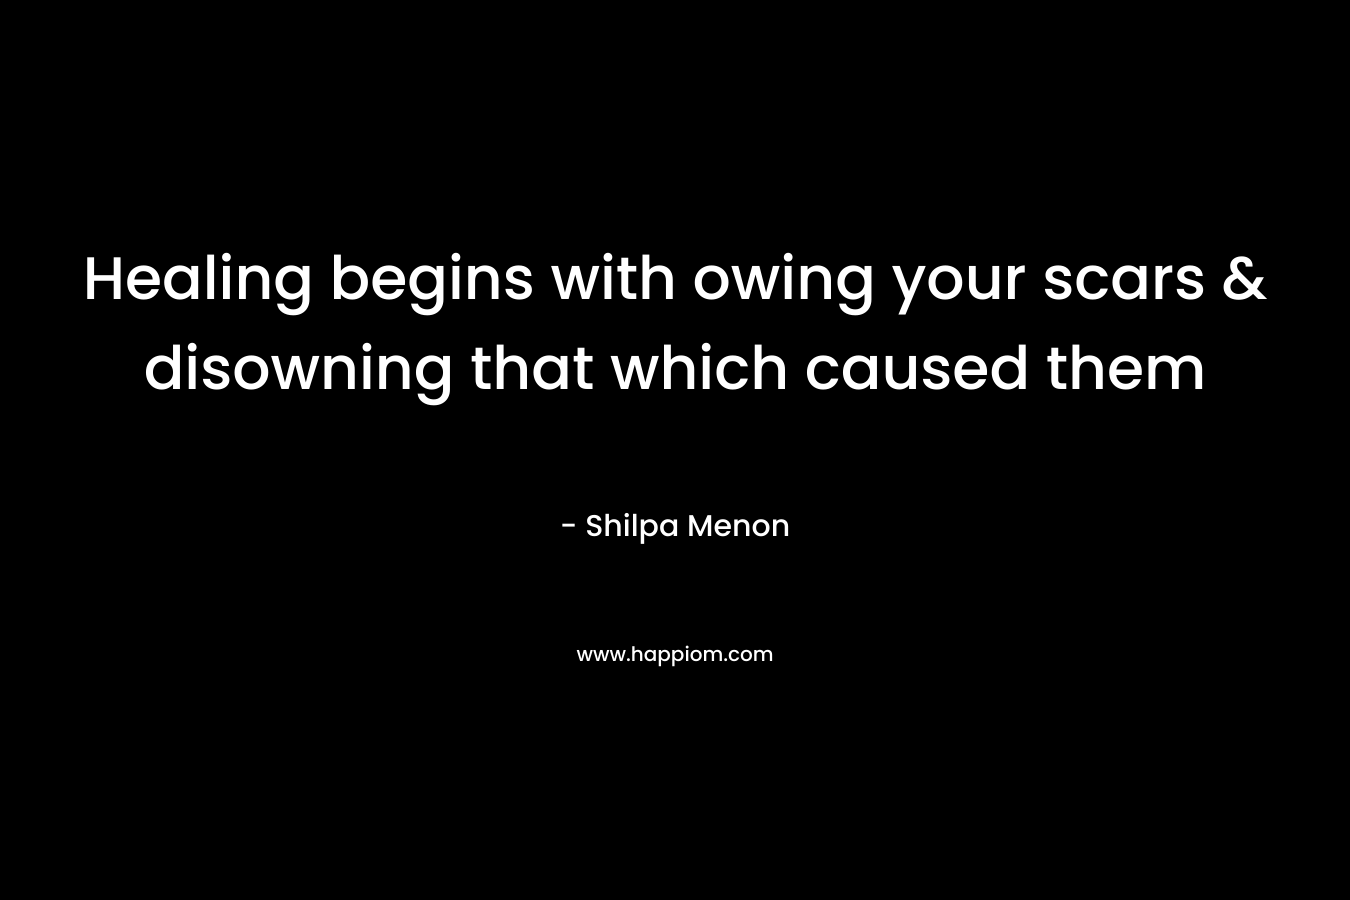 Healing begins with owing your scars & disowning that which caused them